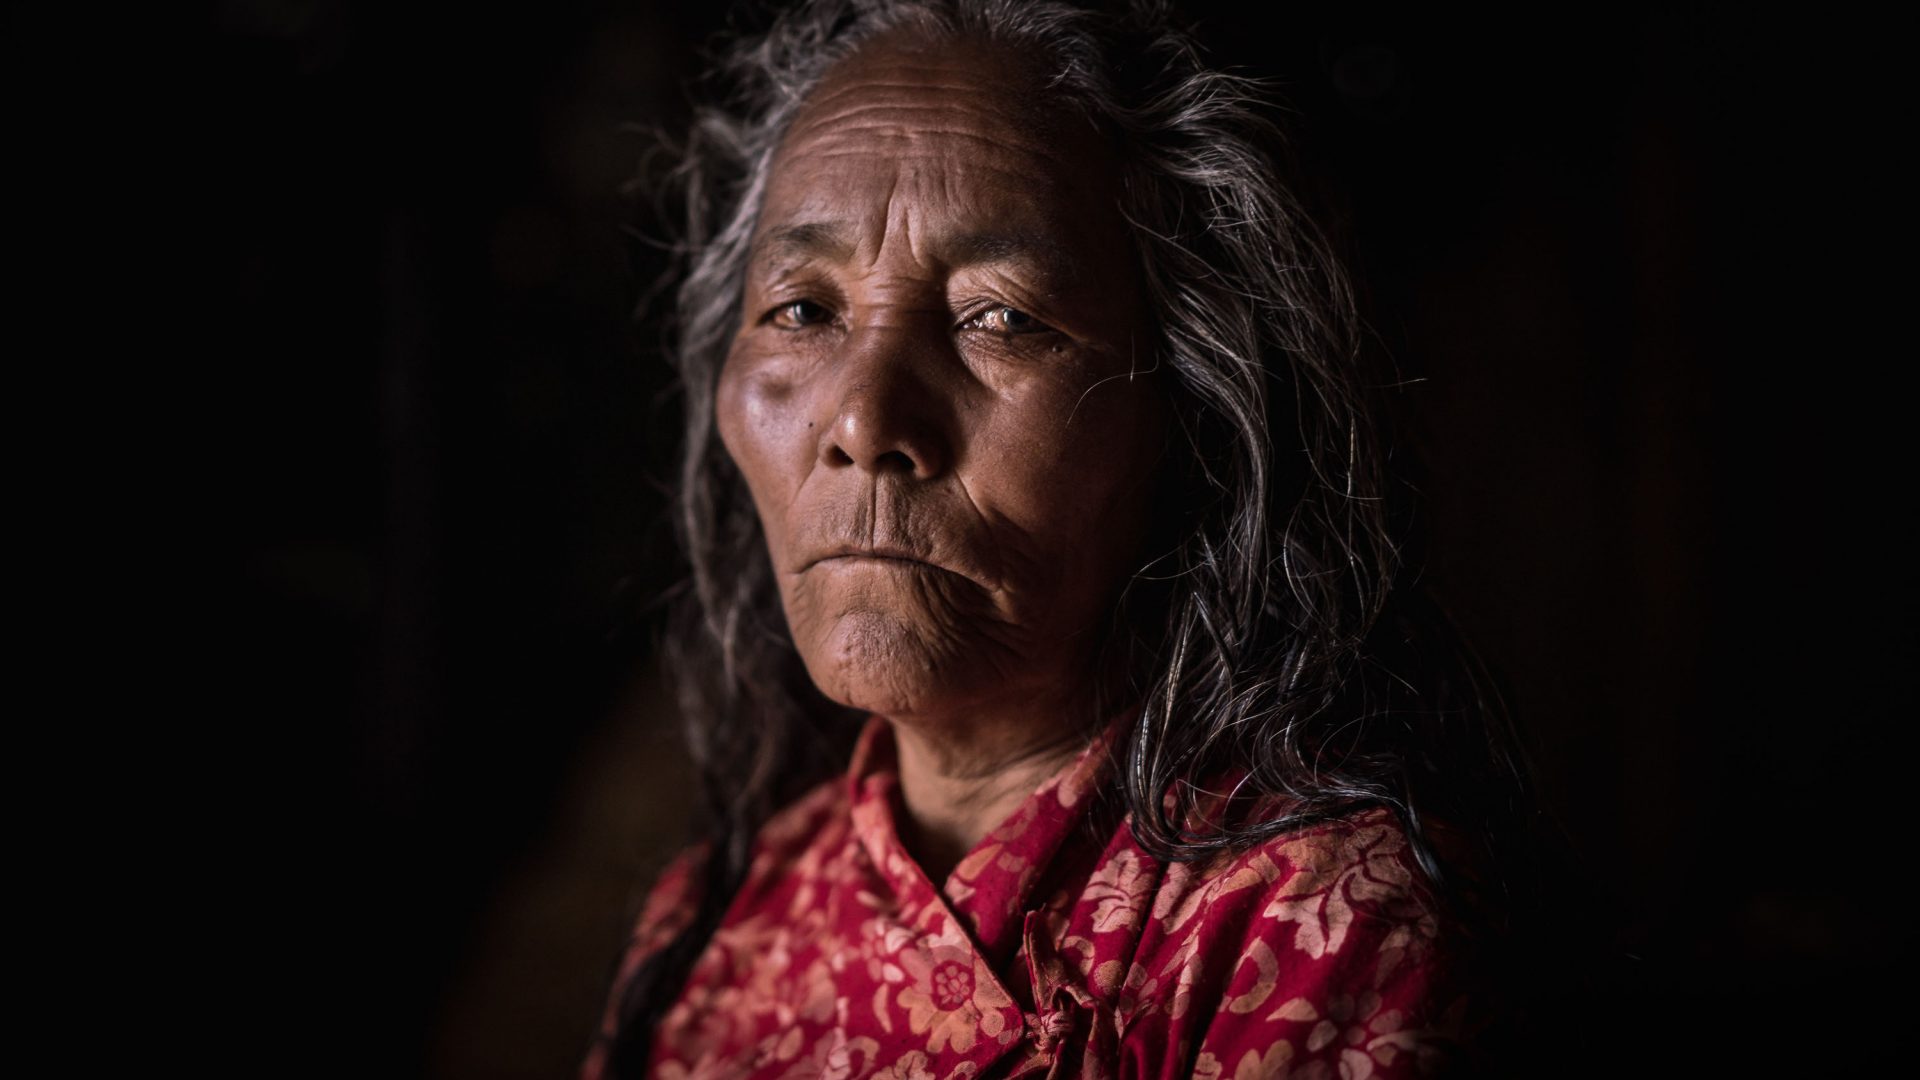 Phool was already a widow when she got trapped under the debris during the earthquake of 2015.